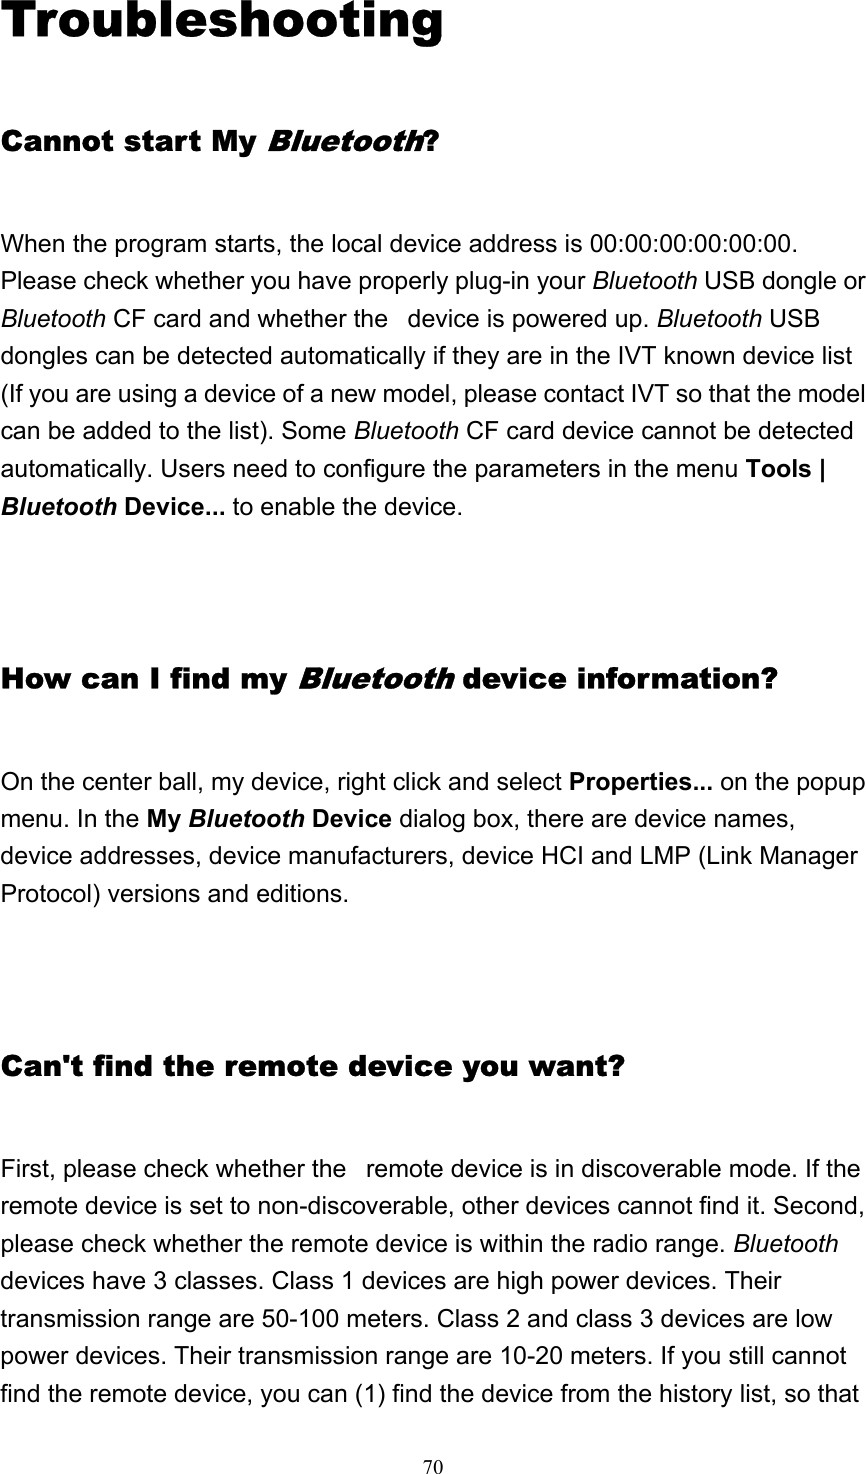   70Troubleshooting Cannot start My Bluetooth? When the program starts, the local device address is 00:00:00:00:00:00. Please check whether you have properly plug-in your Bluetooth USB dongle or Bluetooth CF card and whether the   device is powered up. Bluetooth USB dongles can be detected automatically if they are in the IVT known device list (If you are using a device of a new model, please contact IVT so that the model can be added to the list). Some Bluetooth CF card device cannot be detected automatically. Users need to configure the parameters in the menu Tools | Bluetooth Device... to enable the device.   How can I find my Bluetooth device information? On the center ball, my device, right click and select Properties... on the popup menu. In the My Bluetooth Device dialog box, there are device names, device addresses, device manufacturers, device HCI and LMP (Link Manager Protocol) versions and editions.    Can&apos;t find the remote device you want? First, please check whether the   remote device is in discoverable mode. If the remote device is set to non-discoverable, other devices cannot find it. Second, please check whether the remote device is within the radio range. Bluetooth devices have 3 classes. Class 1 devices are high power devices. Their transmission range are 50-100 meters. Class 2 and class 3 devices are low power devices. Their transmission range are 10-20 meters. If you still cannot find the remote device, you can (1) find the device from the history list, so that 